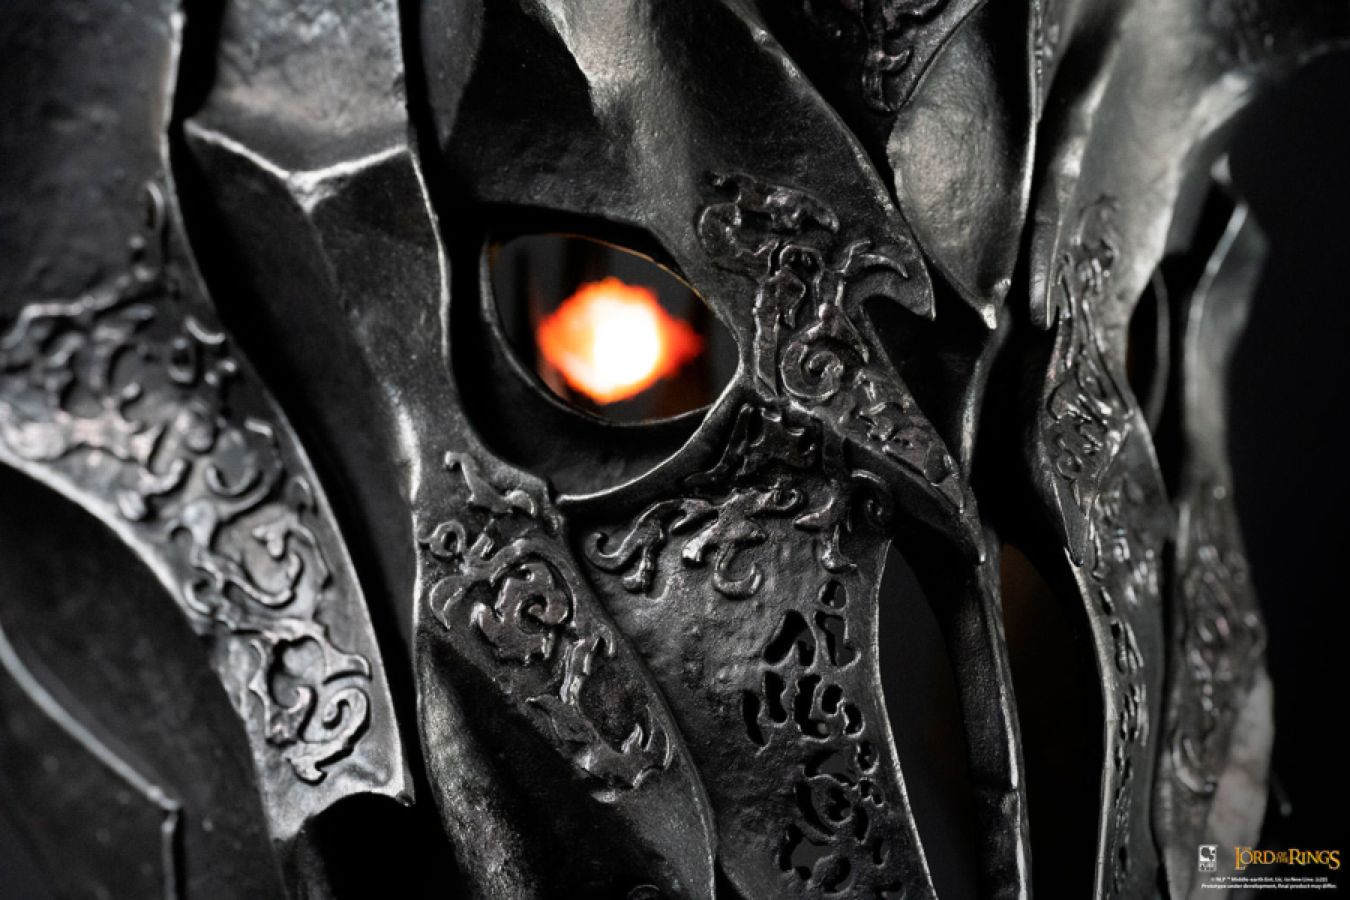 The Lord of the Rings - Sauron 1:1 Scale Art Mask